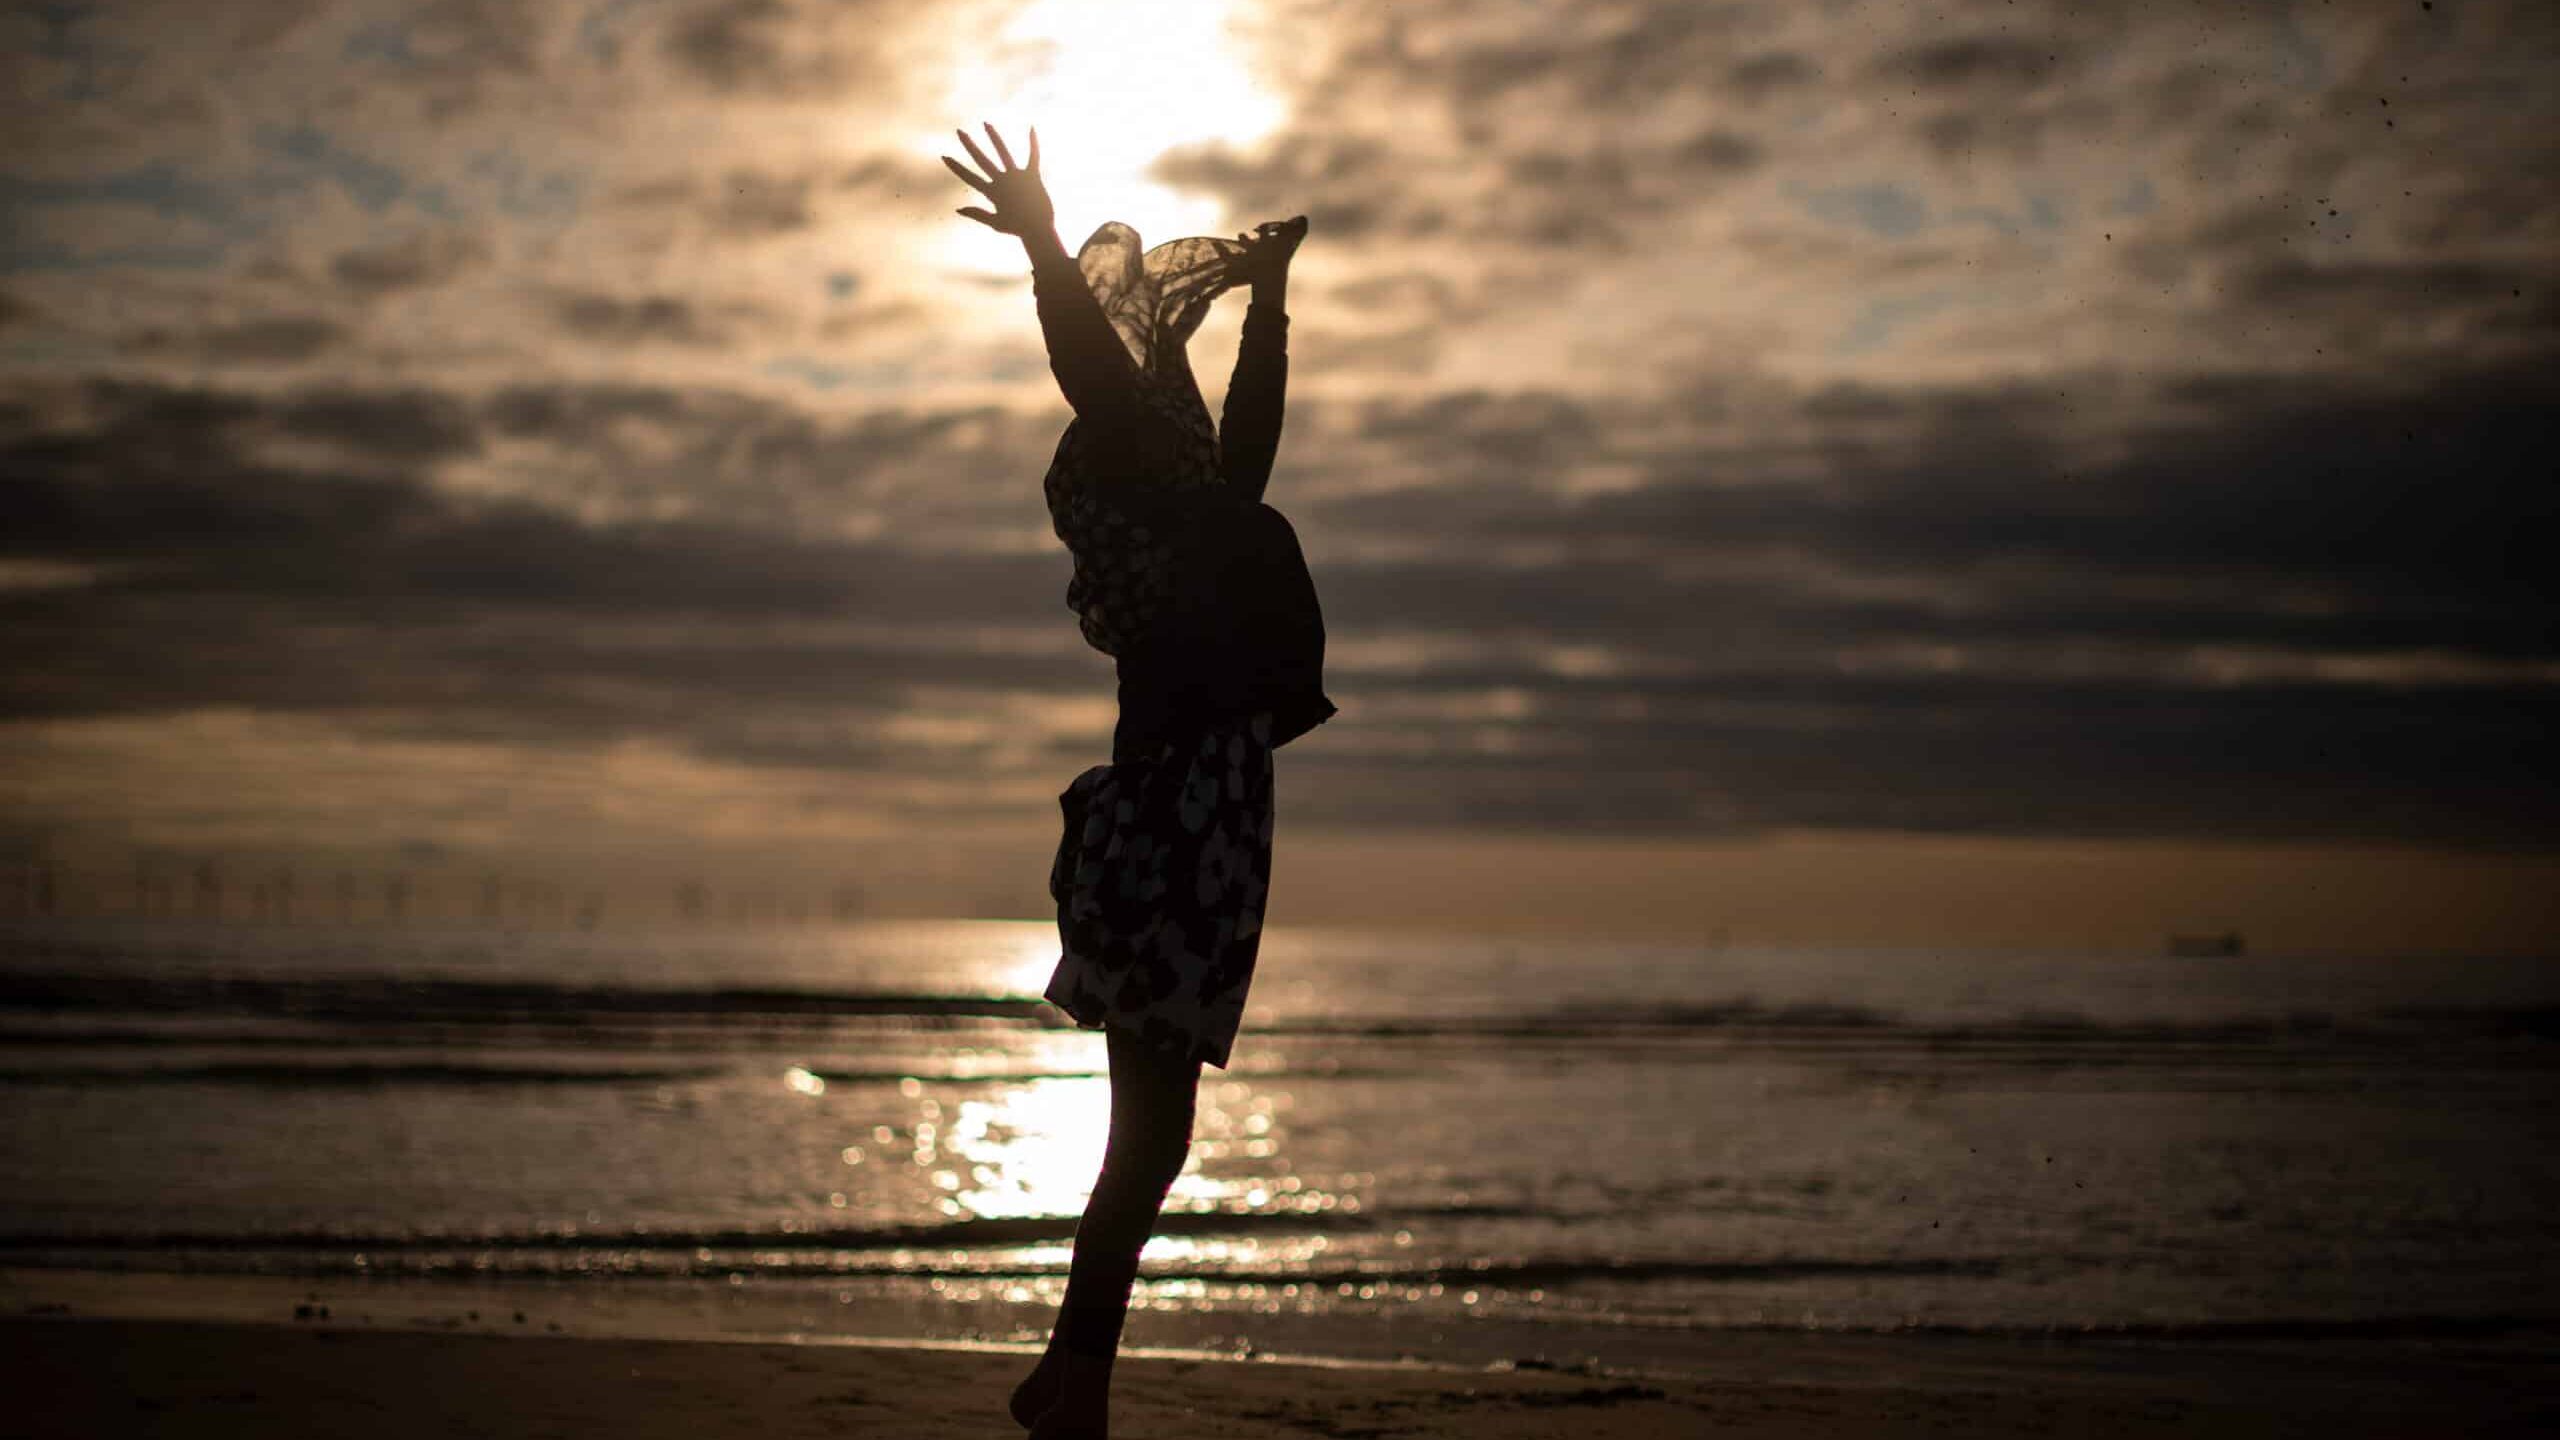 LIVERPOOL, UNITED KINGDOM - AUGUST 21: A young muslim girl dances and runs in the sea as she and her family celebrate Eid Al-Adha by watching the sunset at Crosby beach on August 21, 2018 in Liverpool, England. The traditional four-day celebratory festival marks one of the holiest days in the Islamic religious calendar.